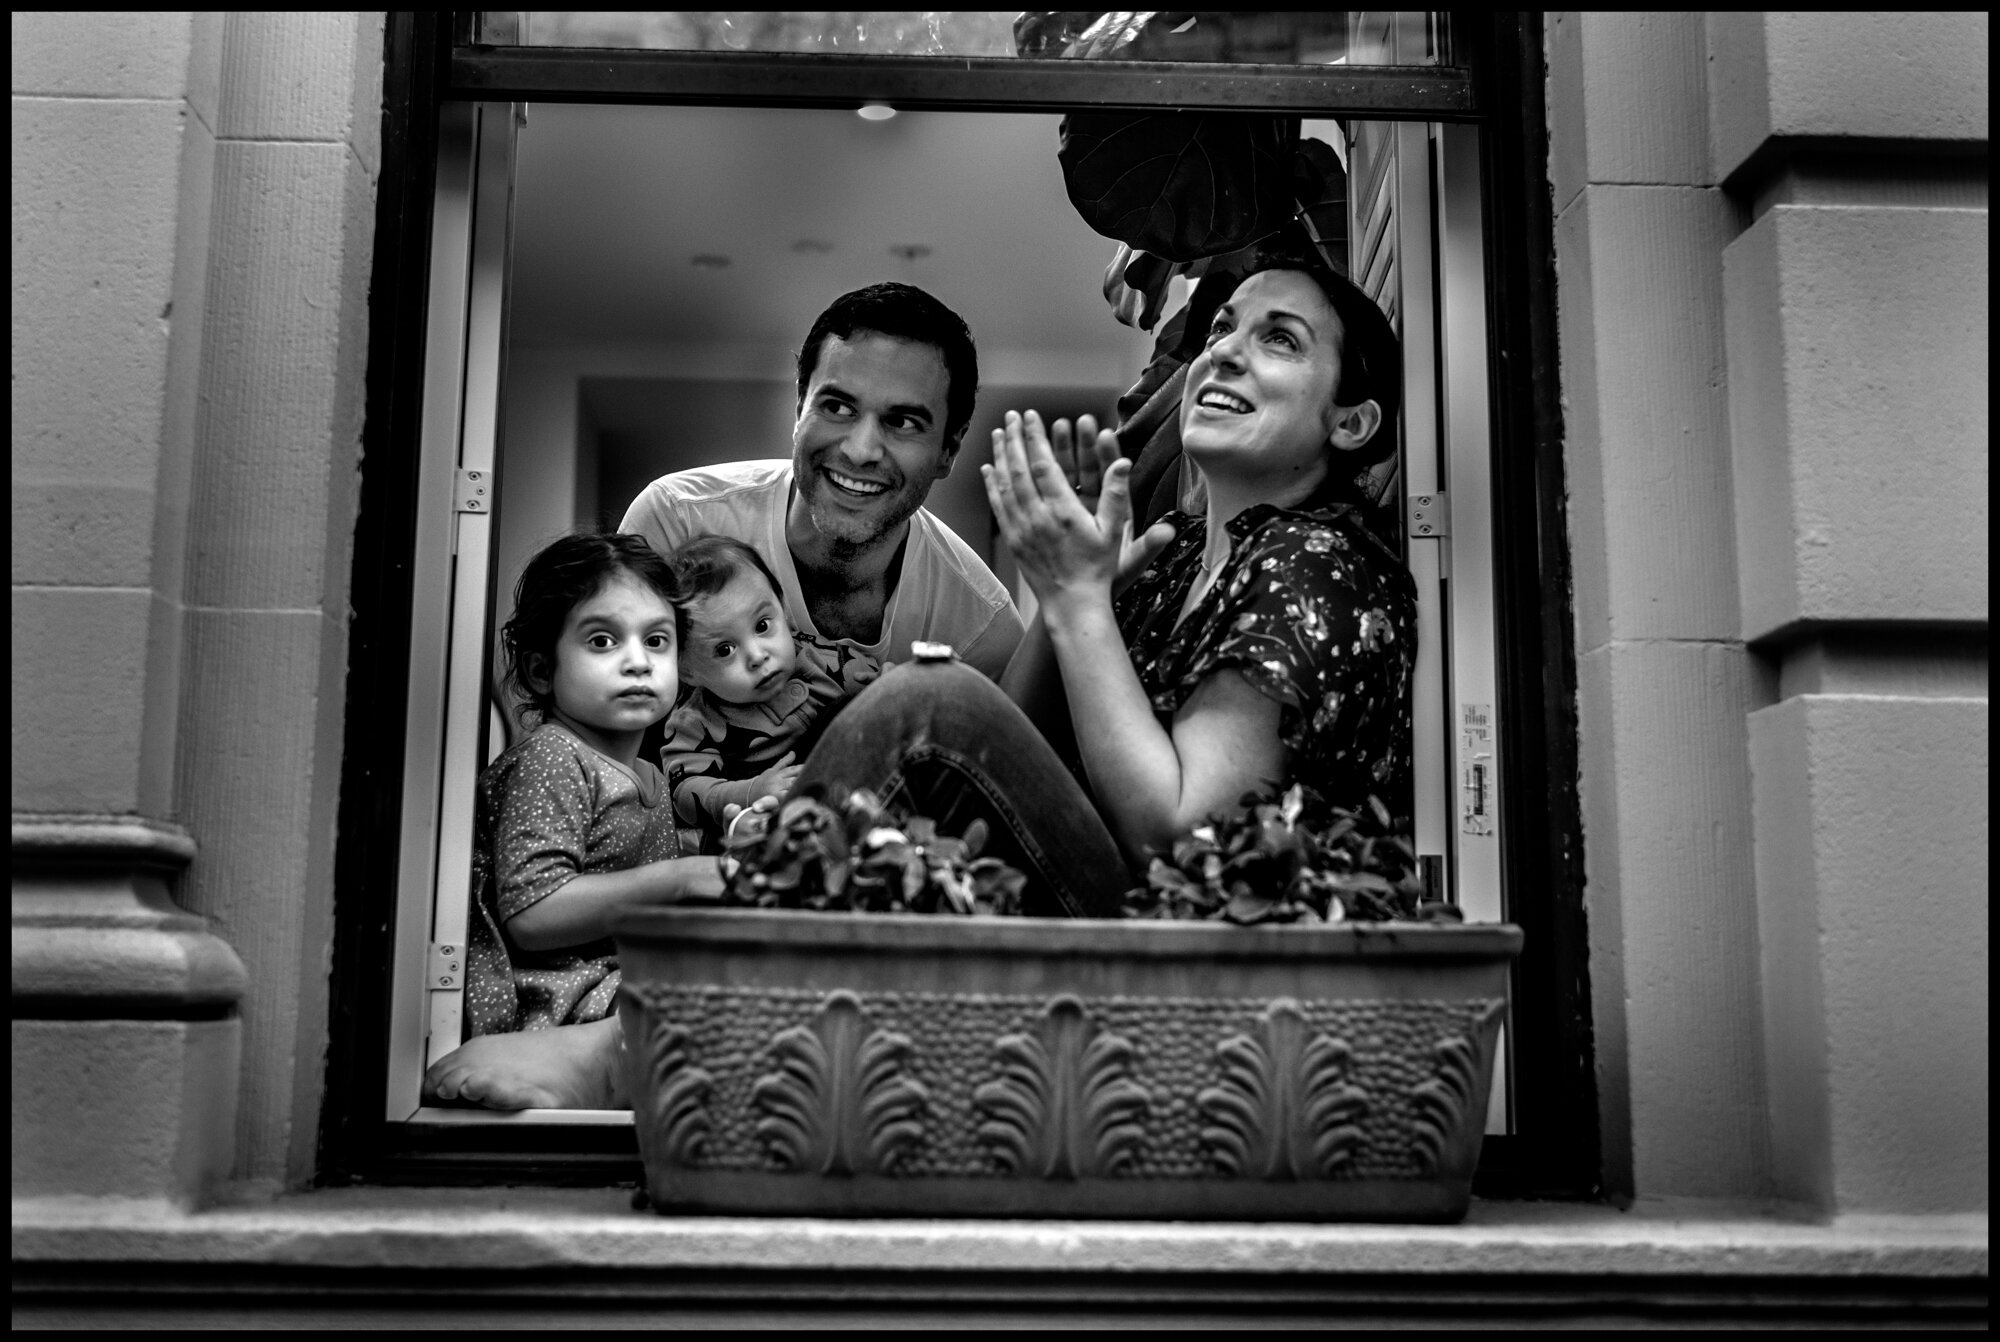  Tonight I went out for groceries and as I walked down my street on the Upper Westside, I saw a beautiful young family sitting in their windowsill. I stopped and introduced myself and told them I was their neighbor and asked if I could make a photogr